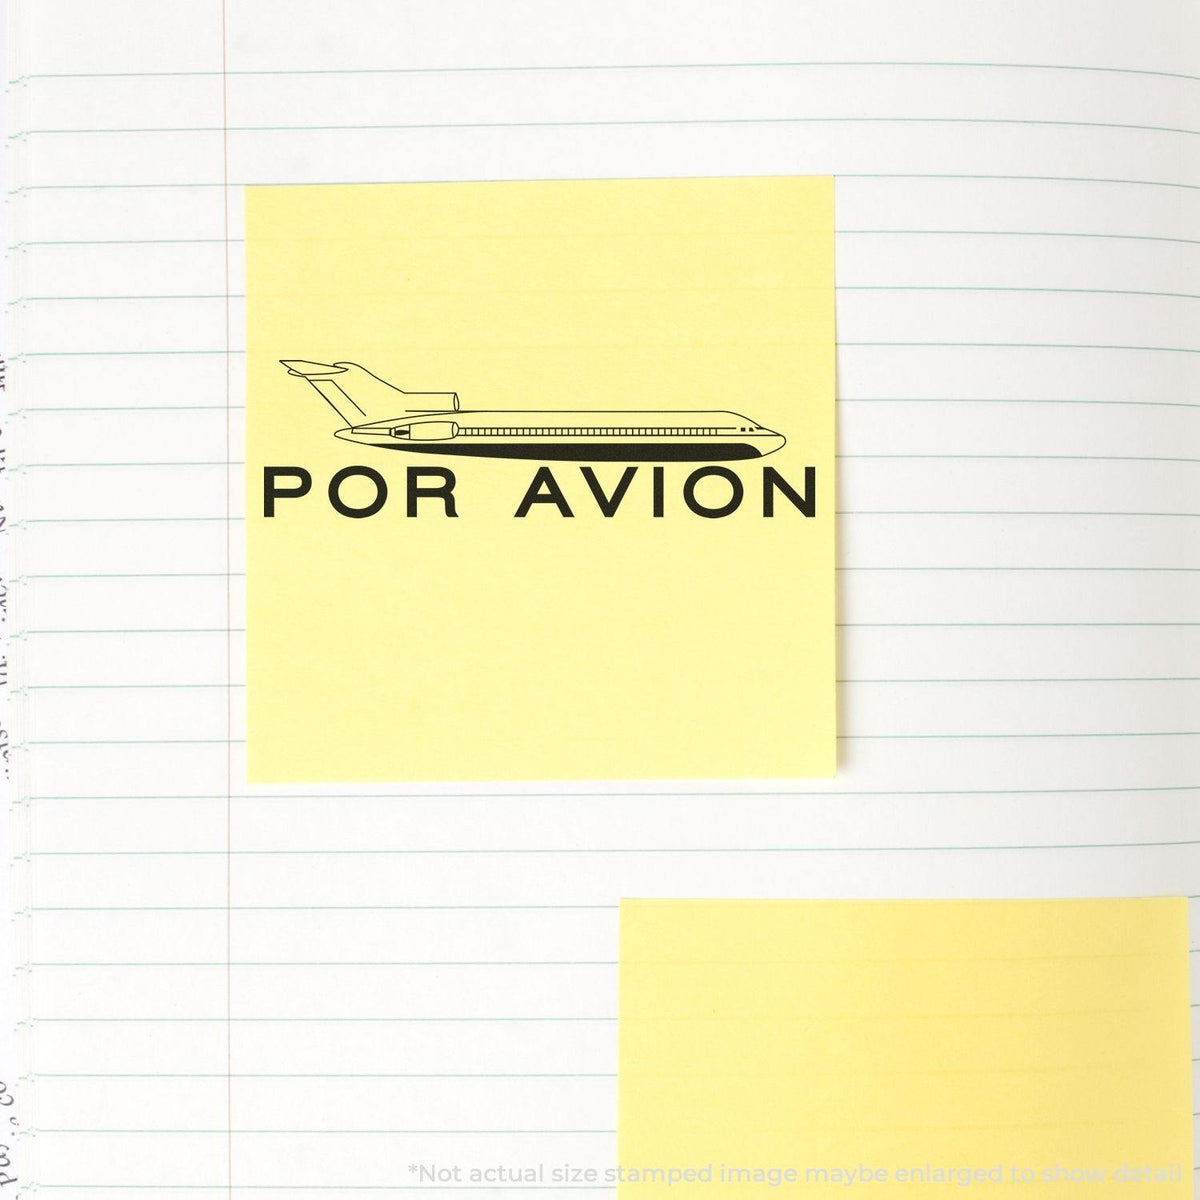 Por Avion Rubber Stamp - Engineer Seal Stamps - Brand_Acorn, Impression Size_Small, Stamp Type_Regular Stamp, Type of Use_Postal &amp; Mailing, Type of Use_Shipping &amp; Receiving